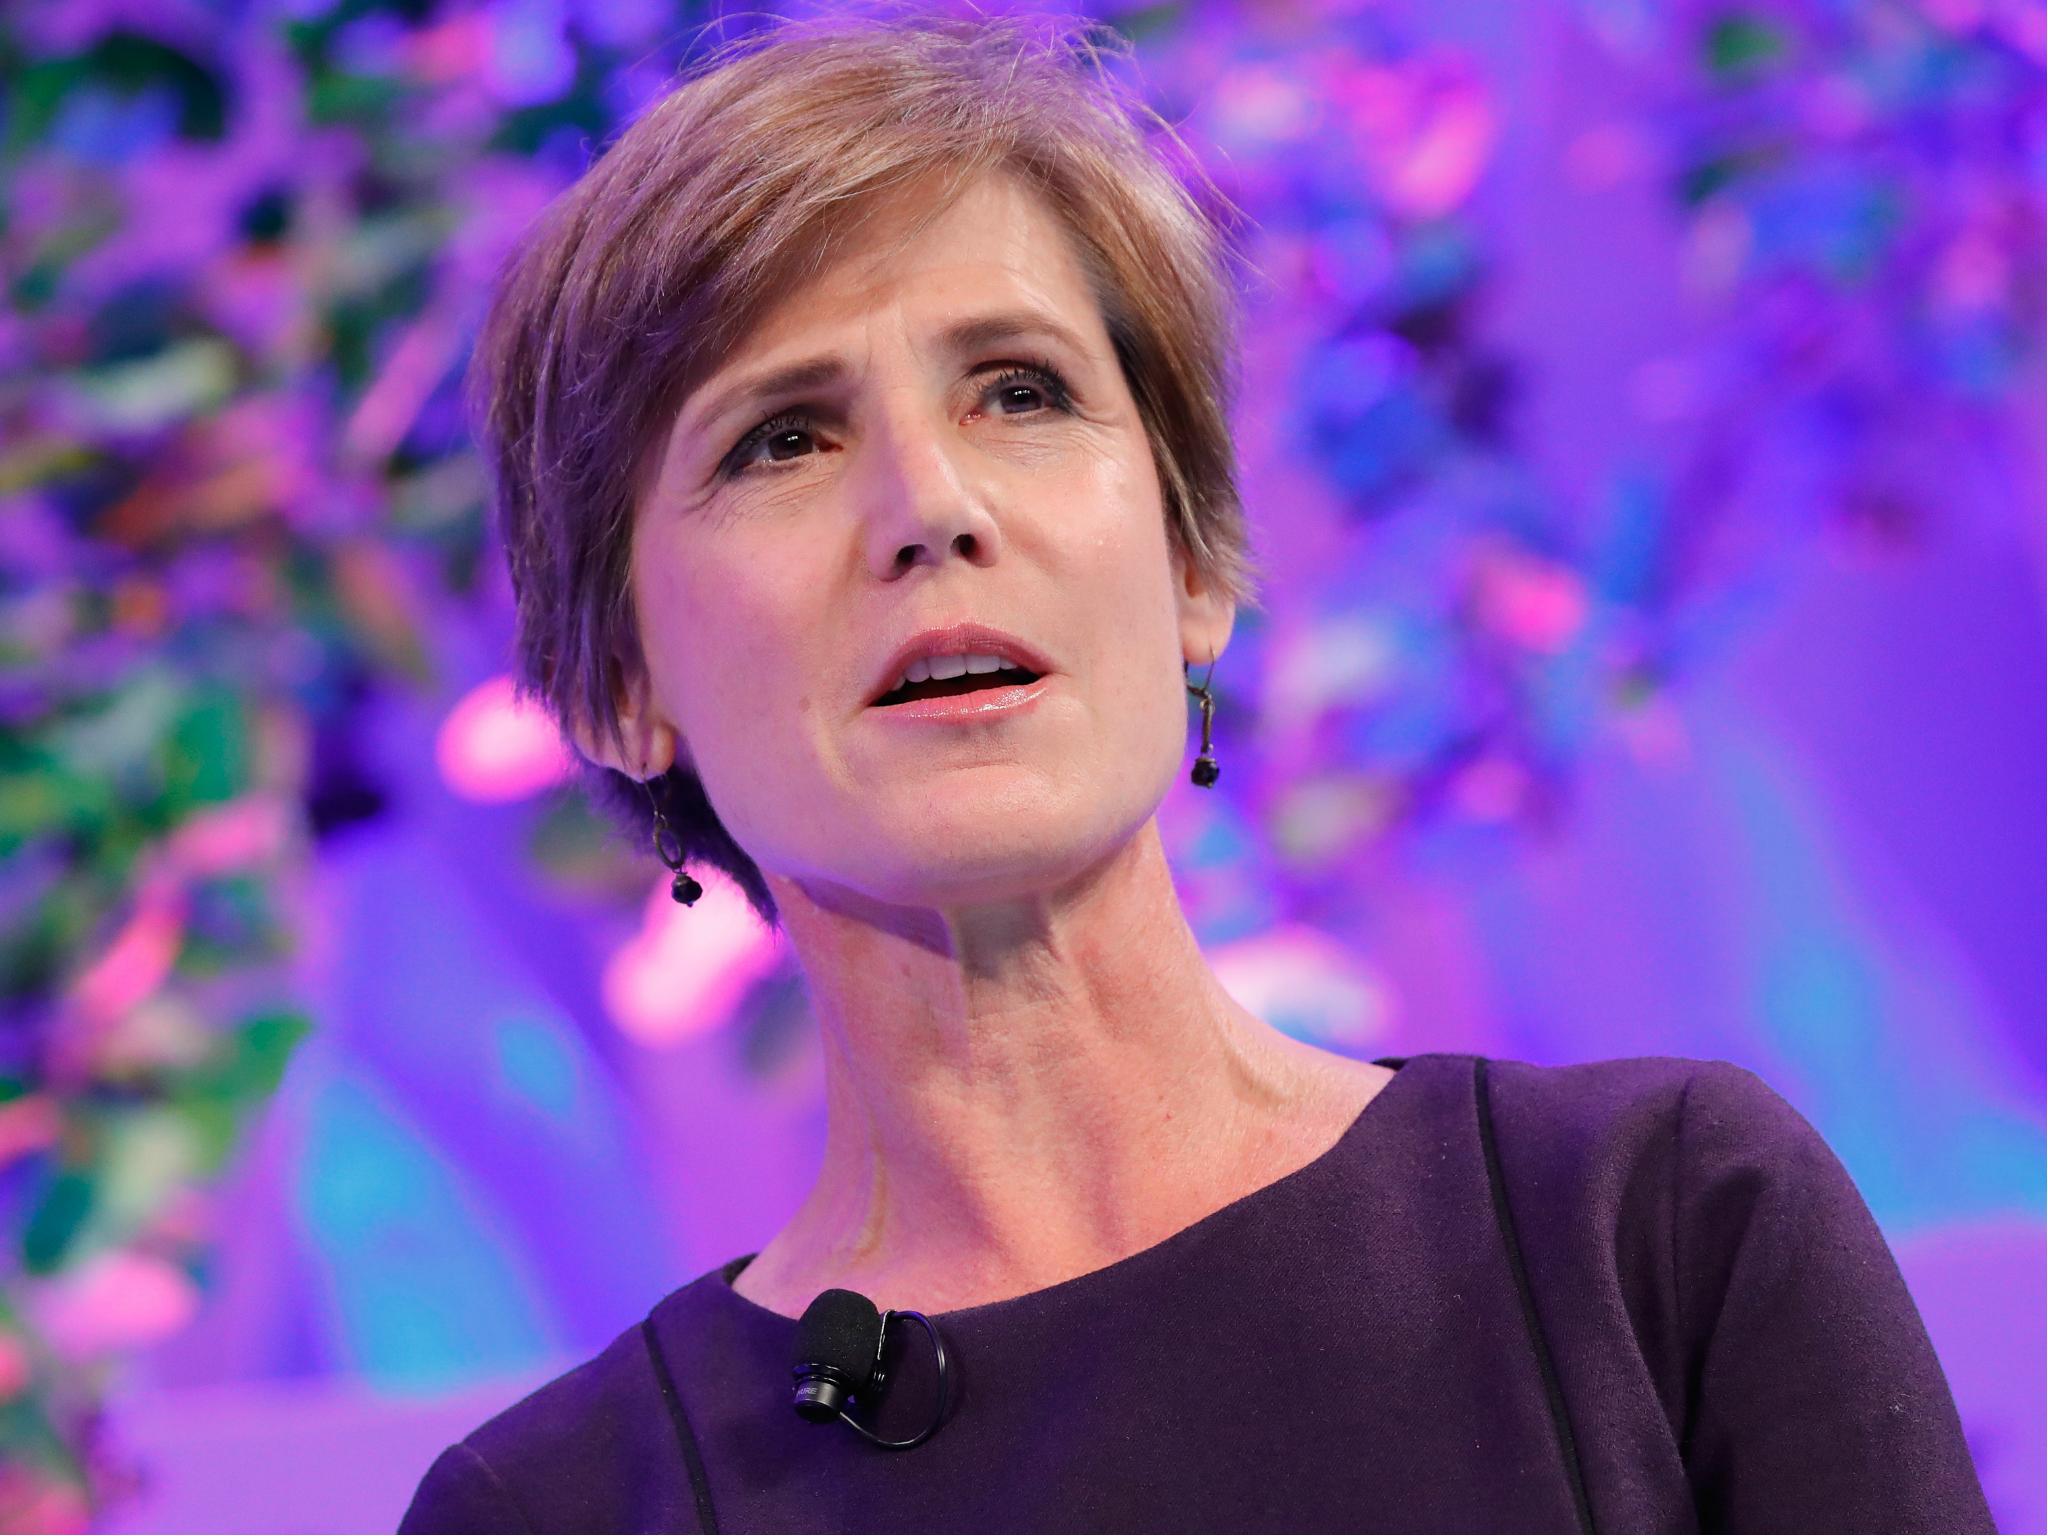 Former Deputy Attorney General, U.S. Department of Justice Sally Yates speaks onstage at the Fortune Most Powerful Women Summit